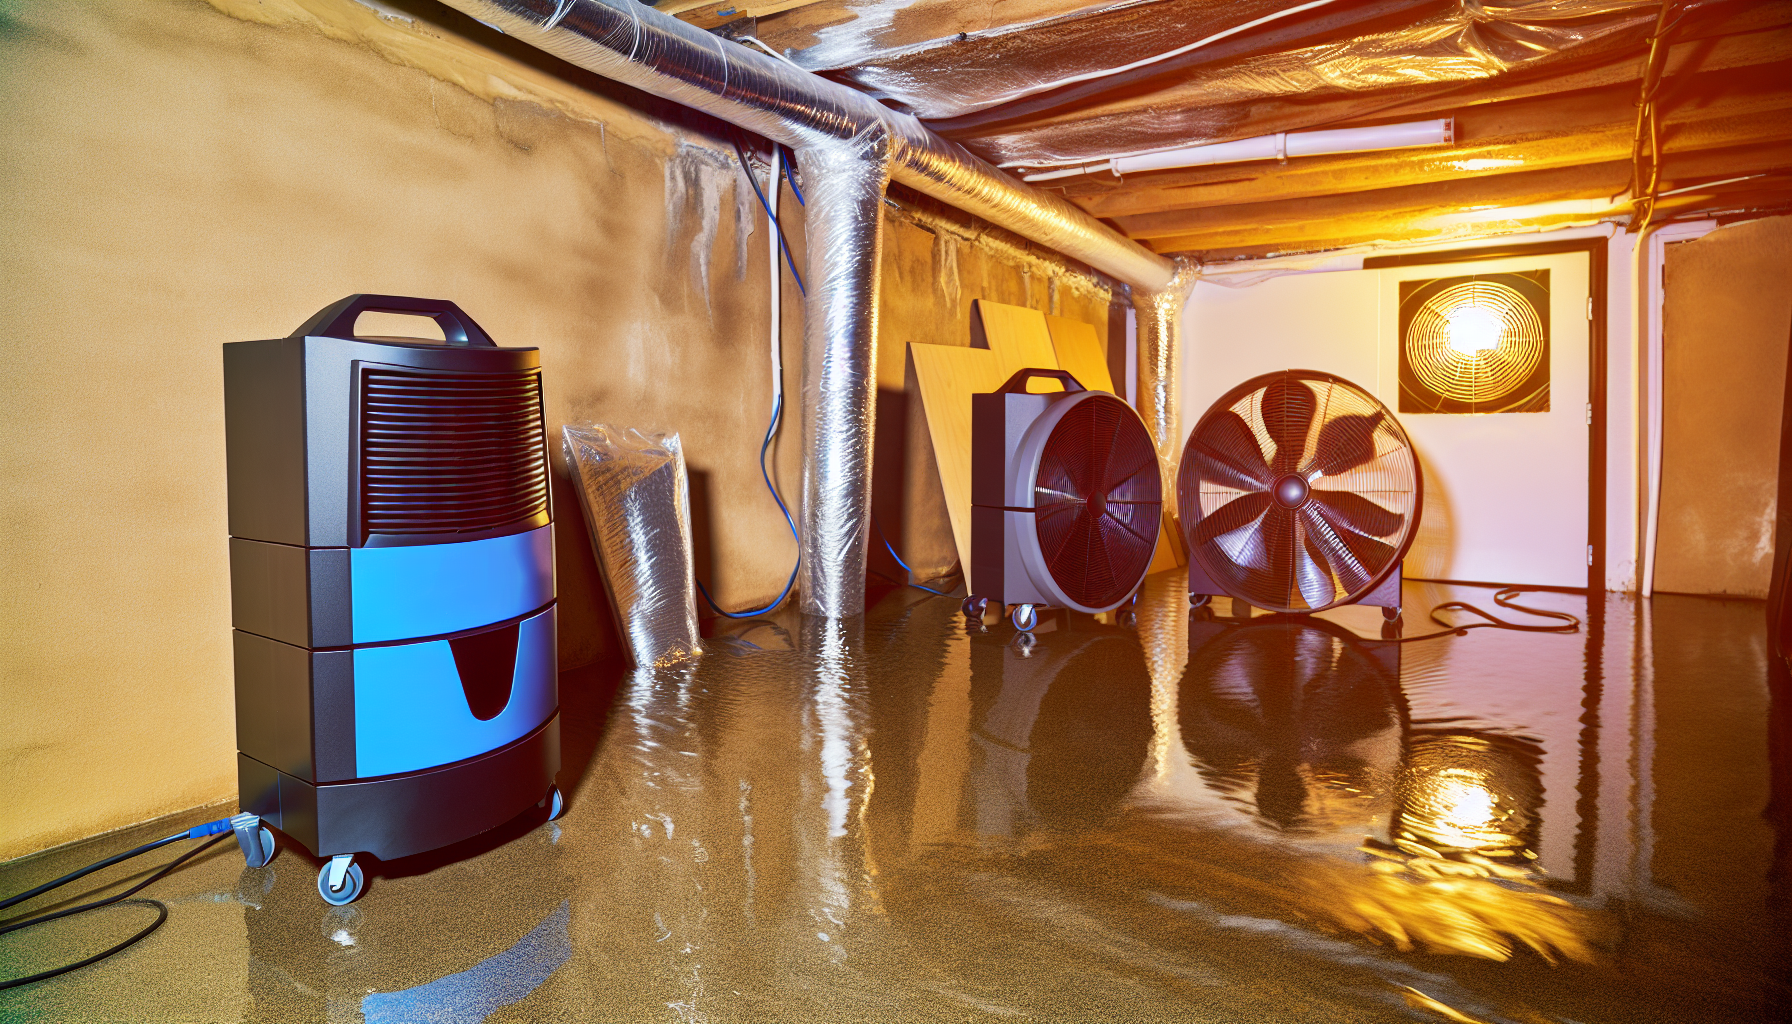 Dehumidifiers and fans accelerating the drying process in a flooded basement